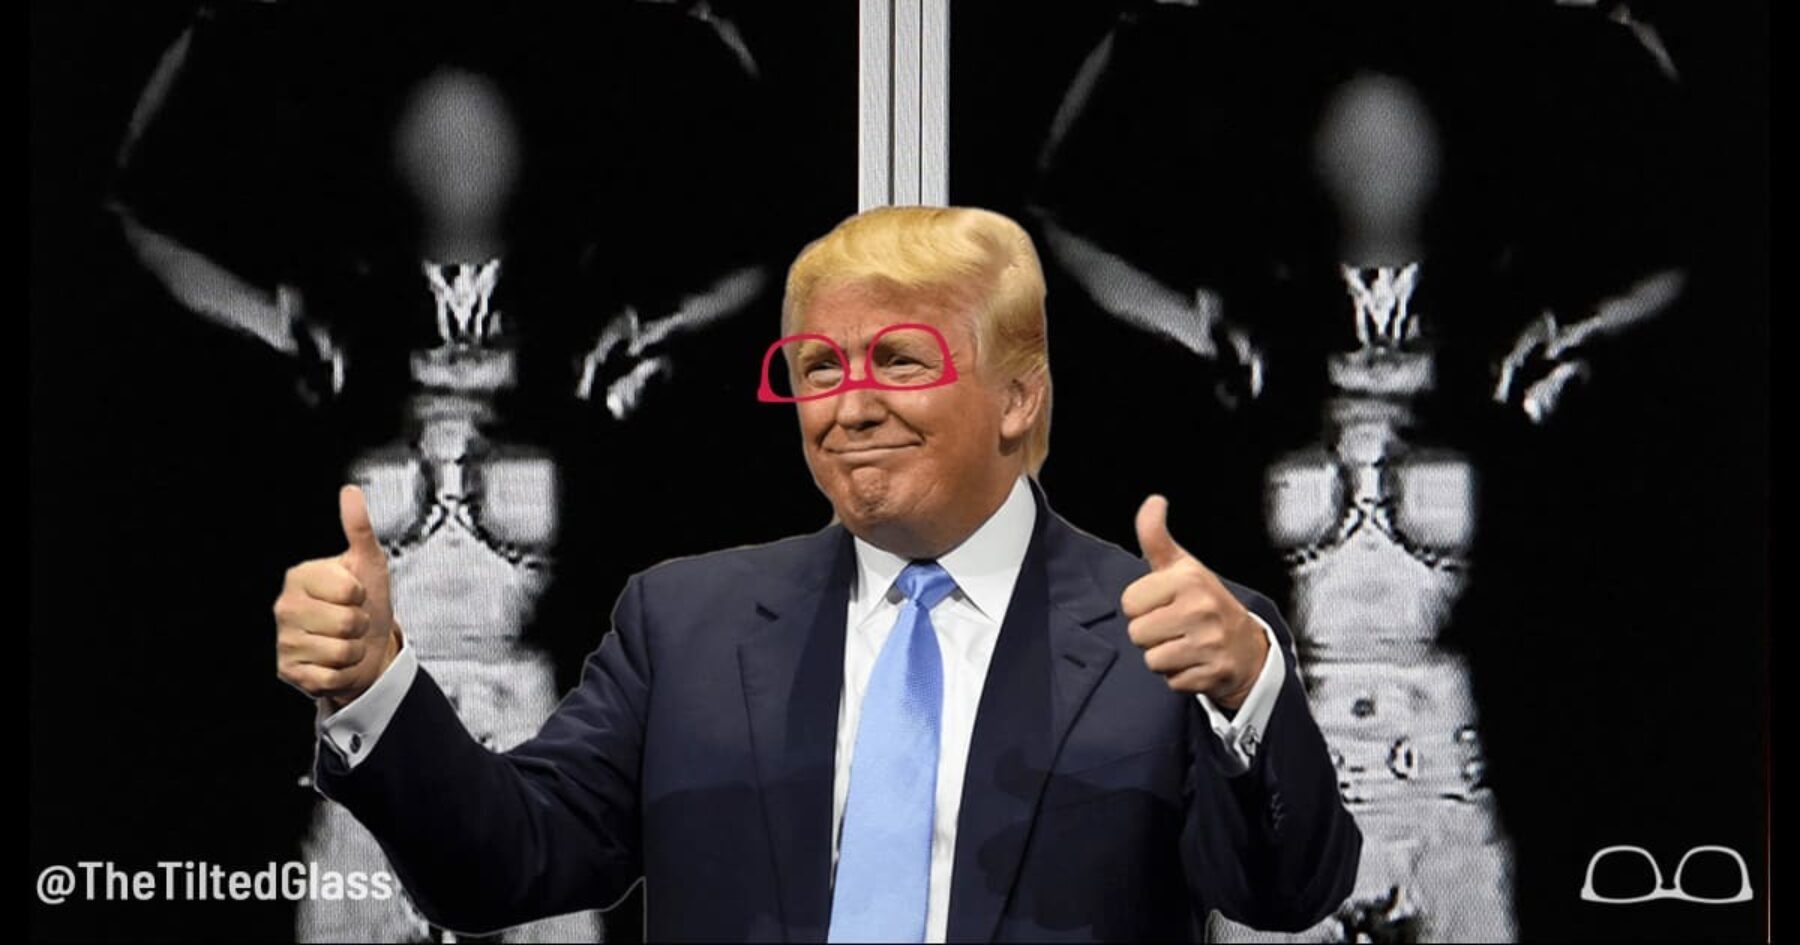 Trump Wishes for X-ray Vision as Super Power